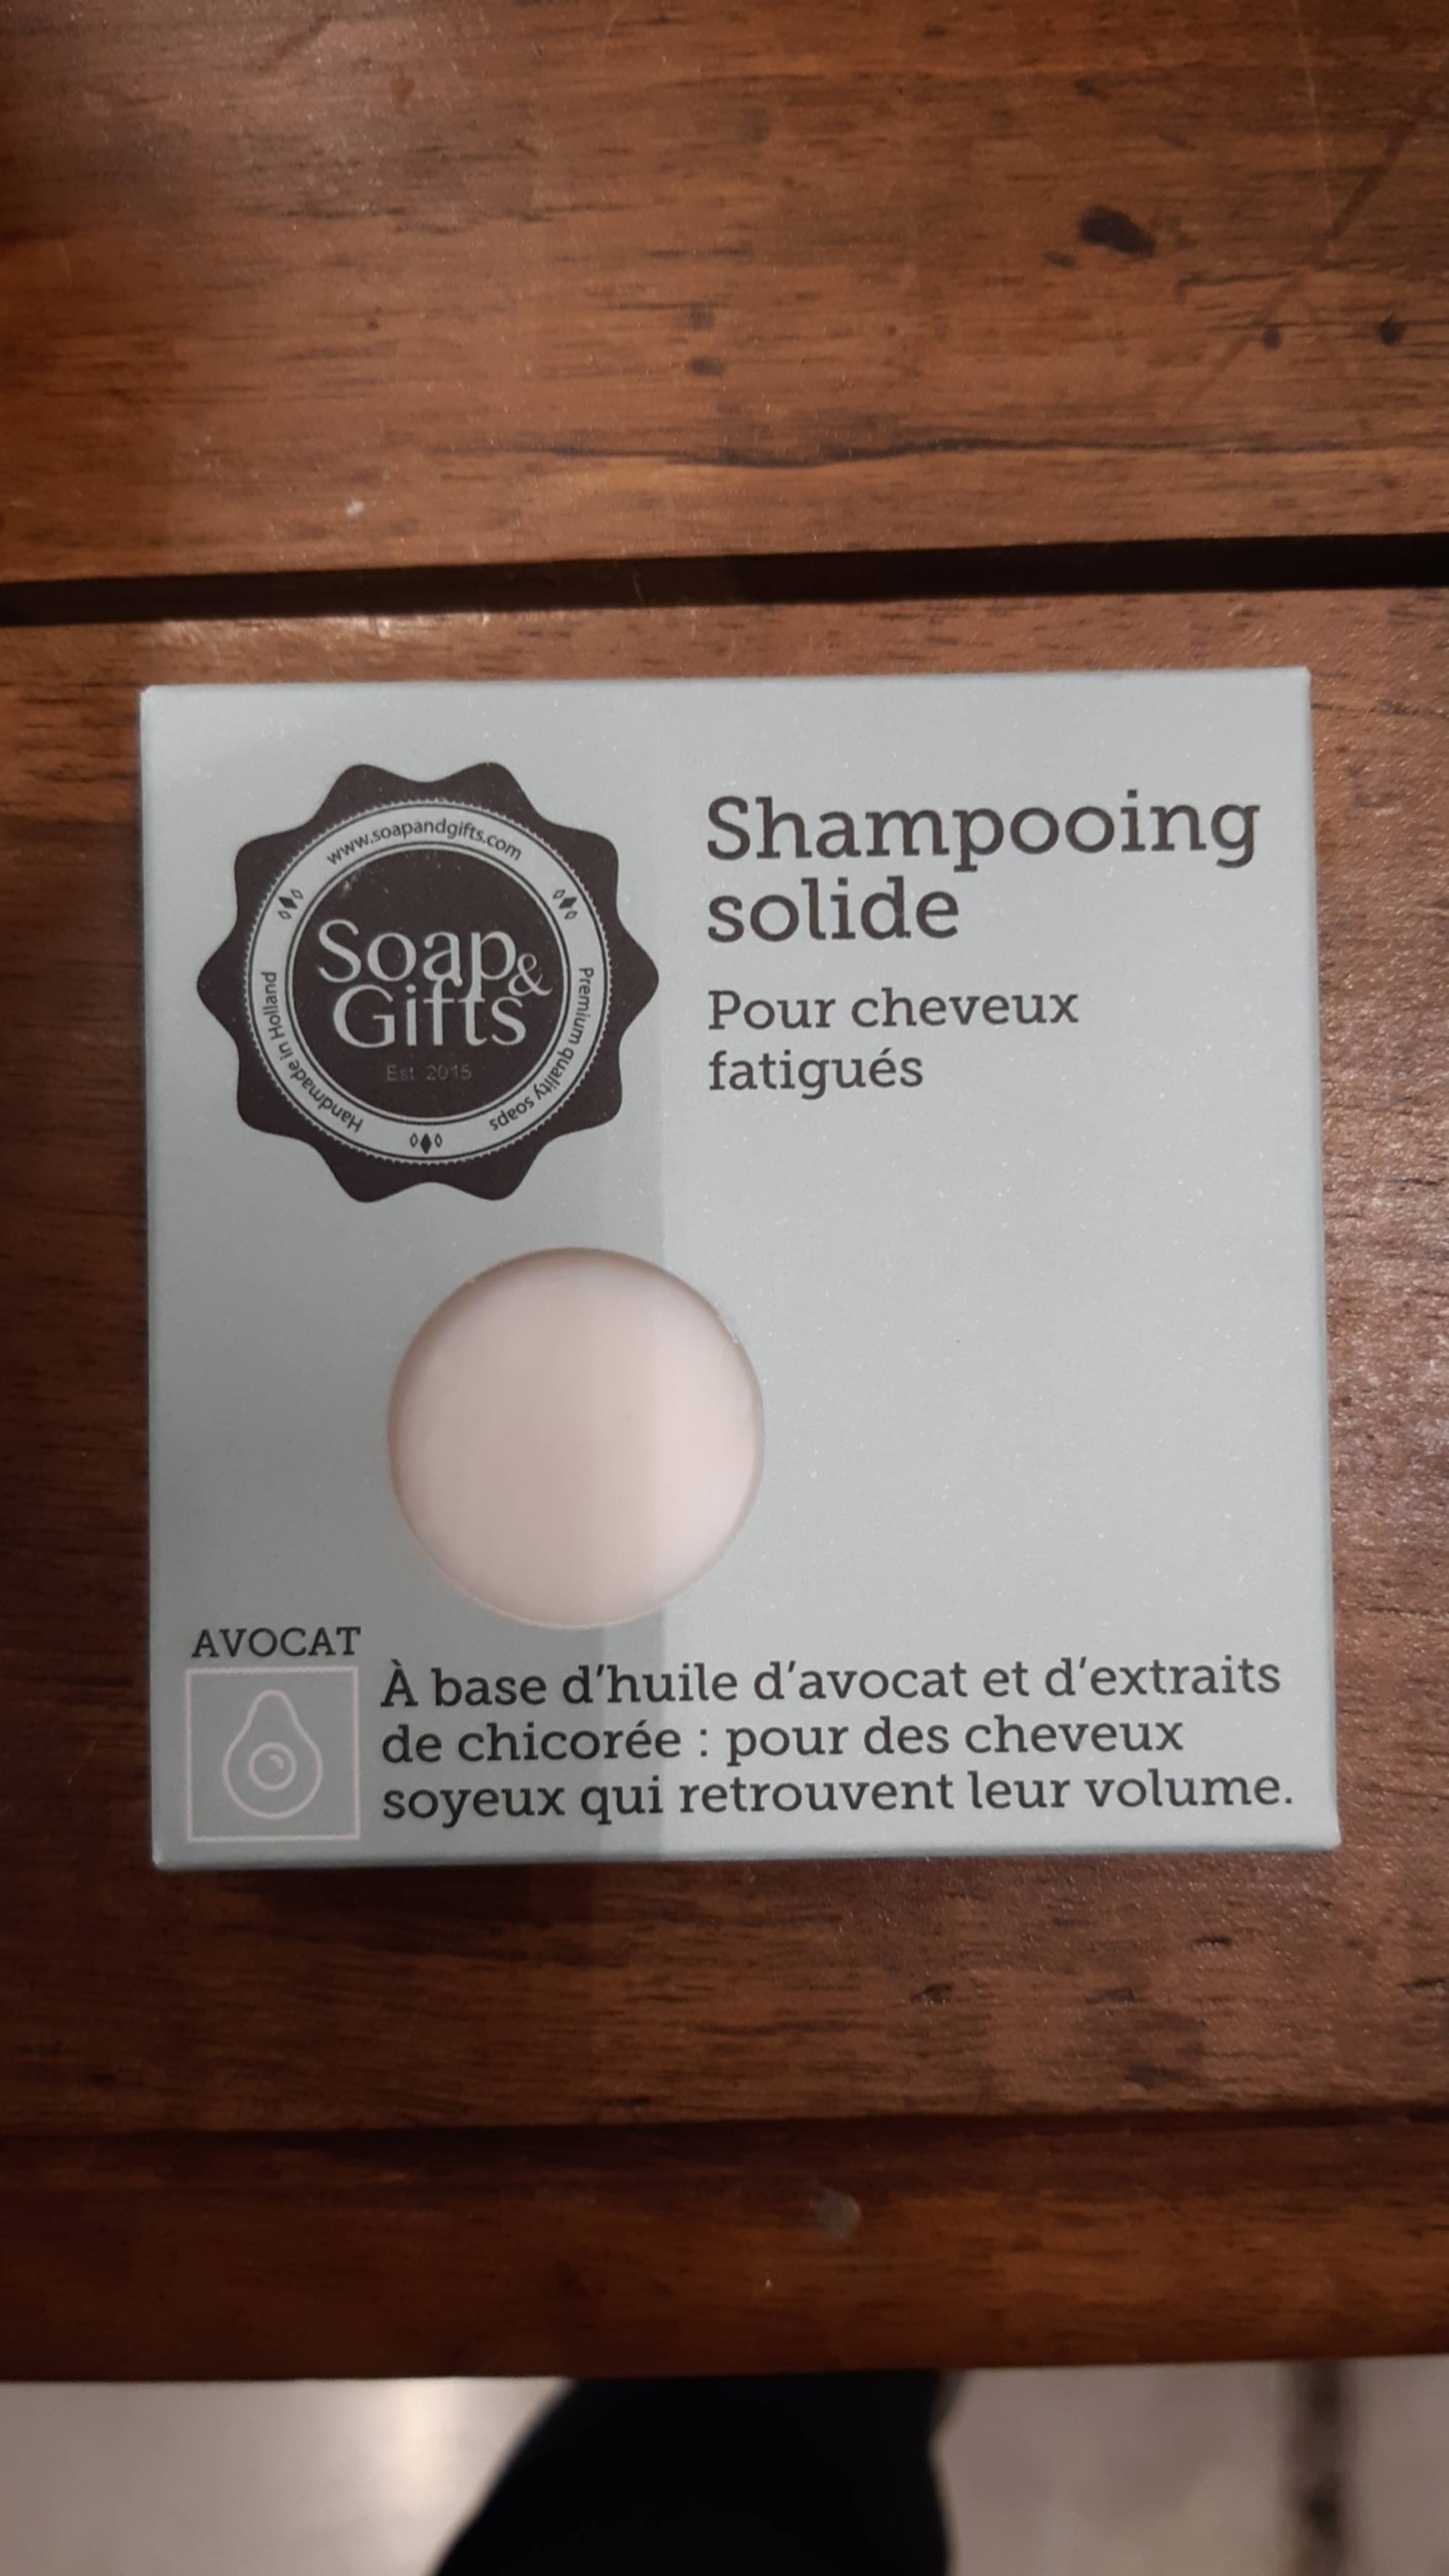 SOAP & GIFTS - Avocat - Shampooing solide